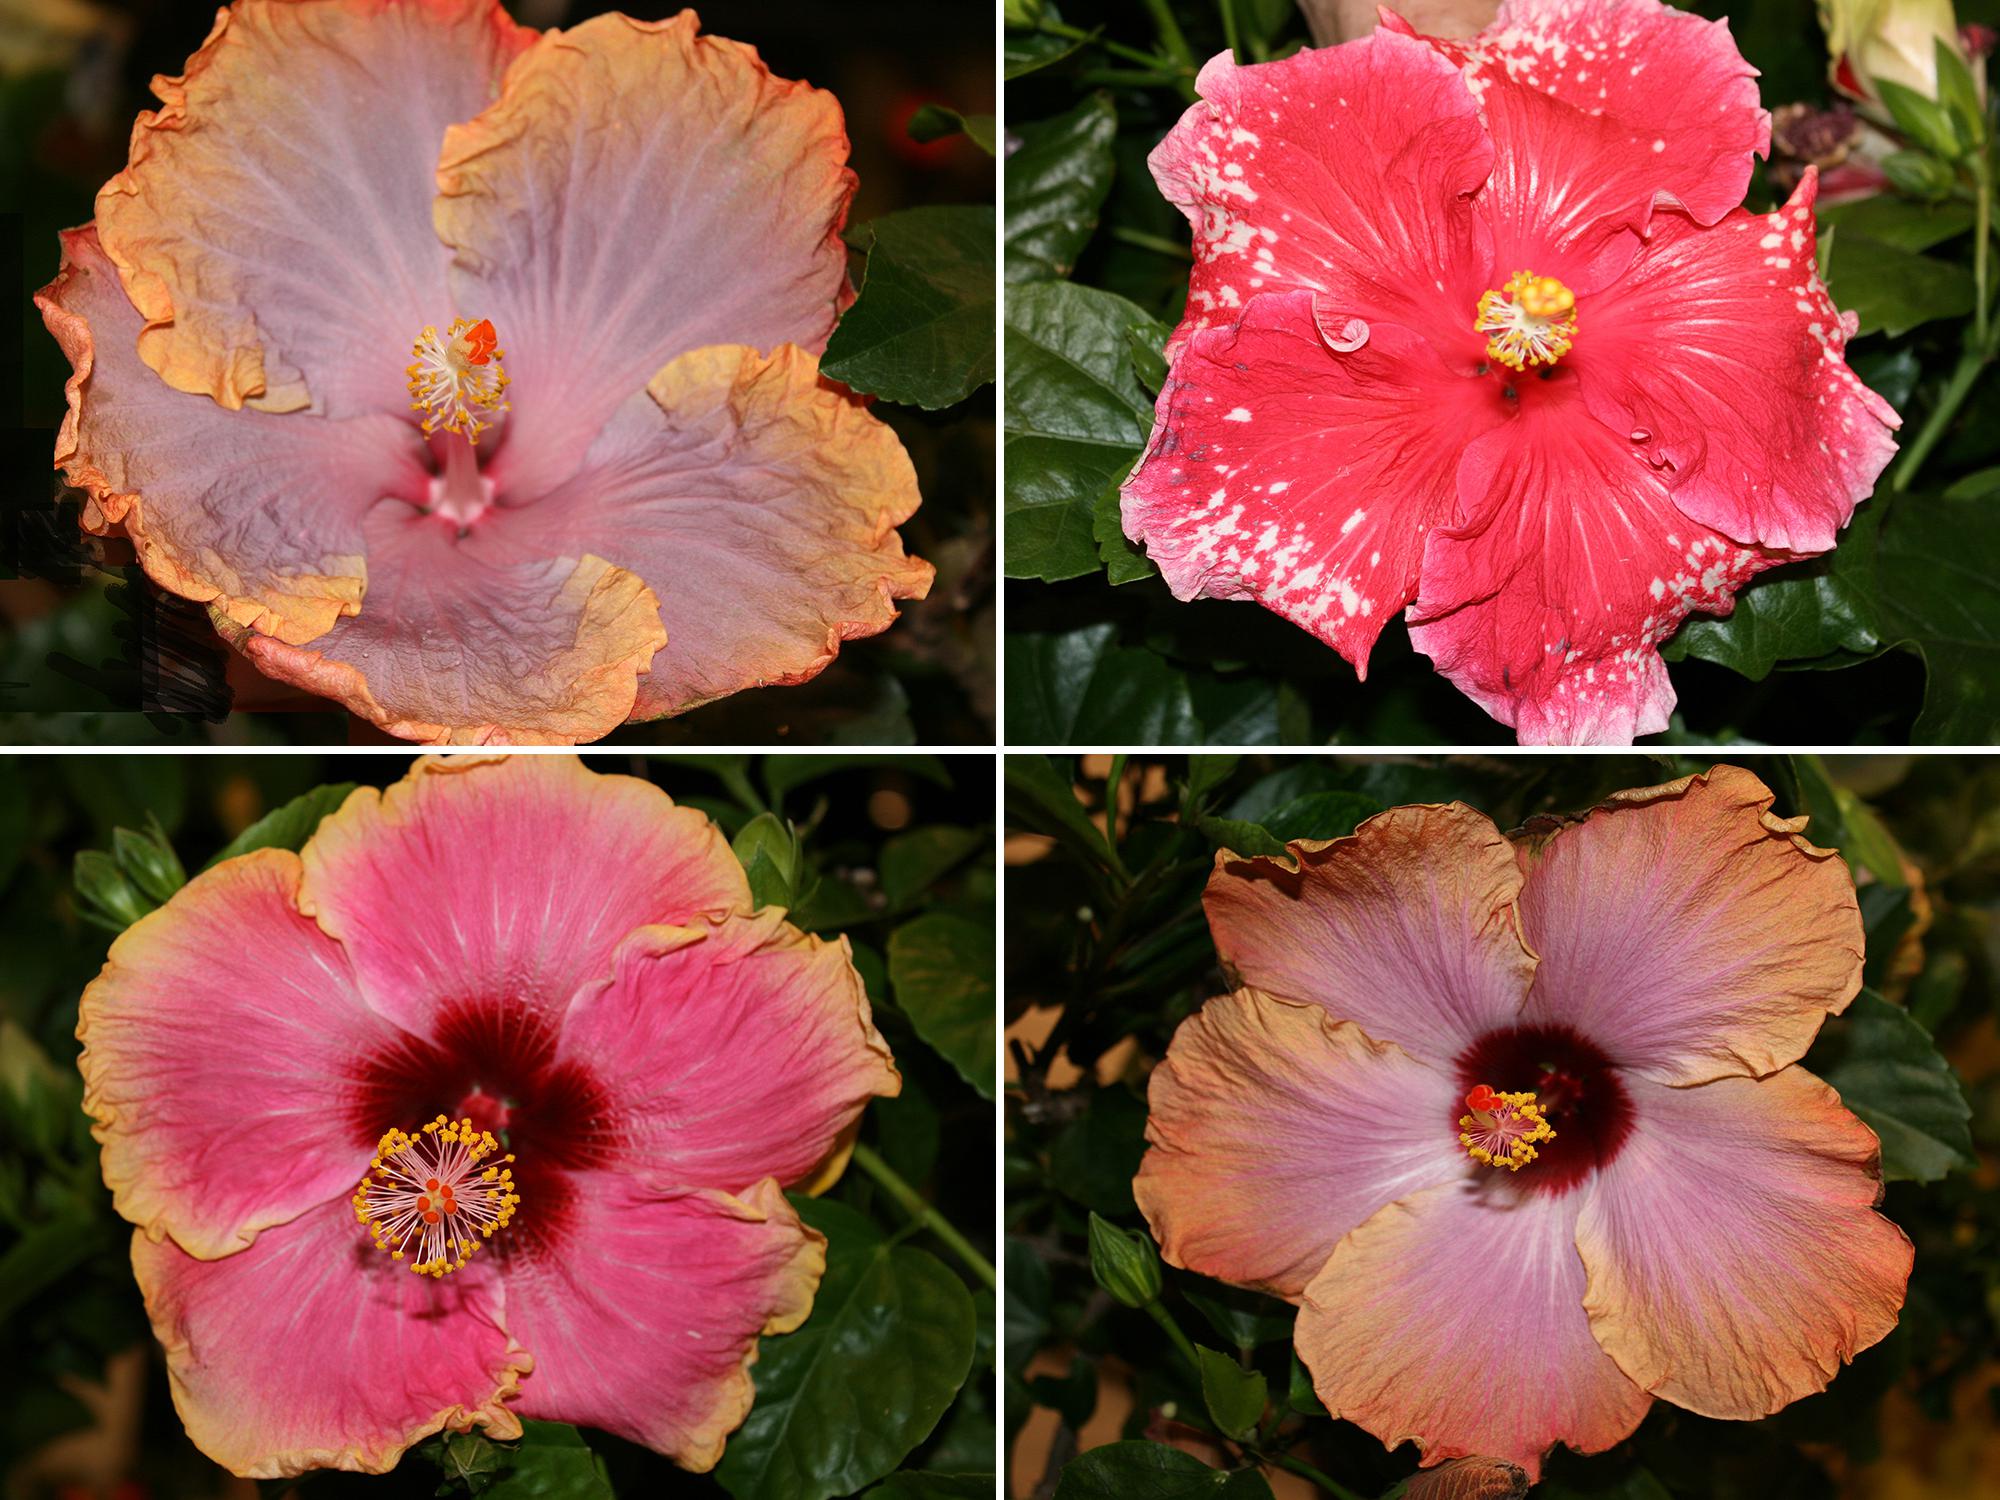 Tropical hibiscus, such as this Cajun Creole Lady (top left), require consistent moisture. Although Cajun Peppermint Patty (top right) flowers bloom for just one day, the plants produce flowers from spring until fall. Tropical hibiscus, such as this Cajun Dixieland Delight (bottom left), produce flowers with spectacular colors and combinations. The dark green and glossy foliage of tropical hibiscus such as this Cajun Rum Runner (bottom right) provides a nice background for the colorful blooms.